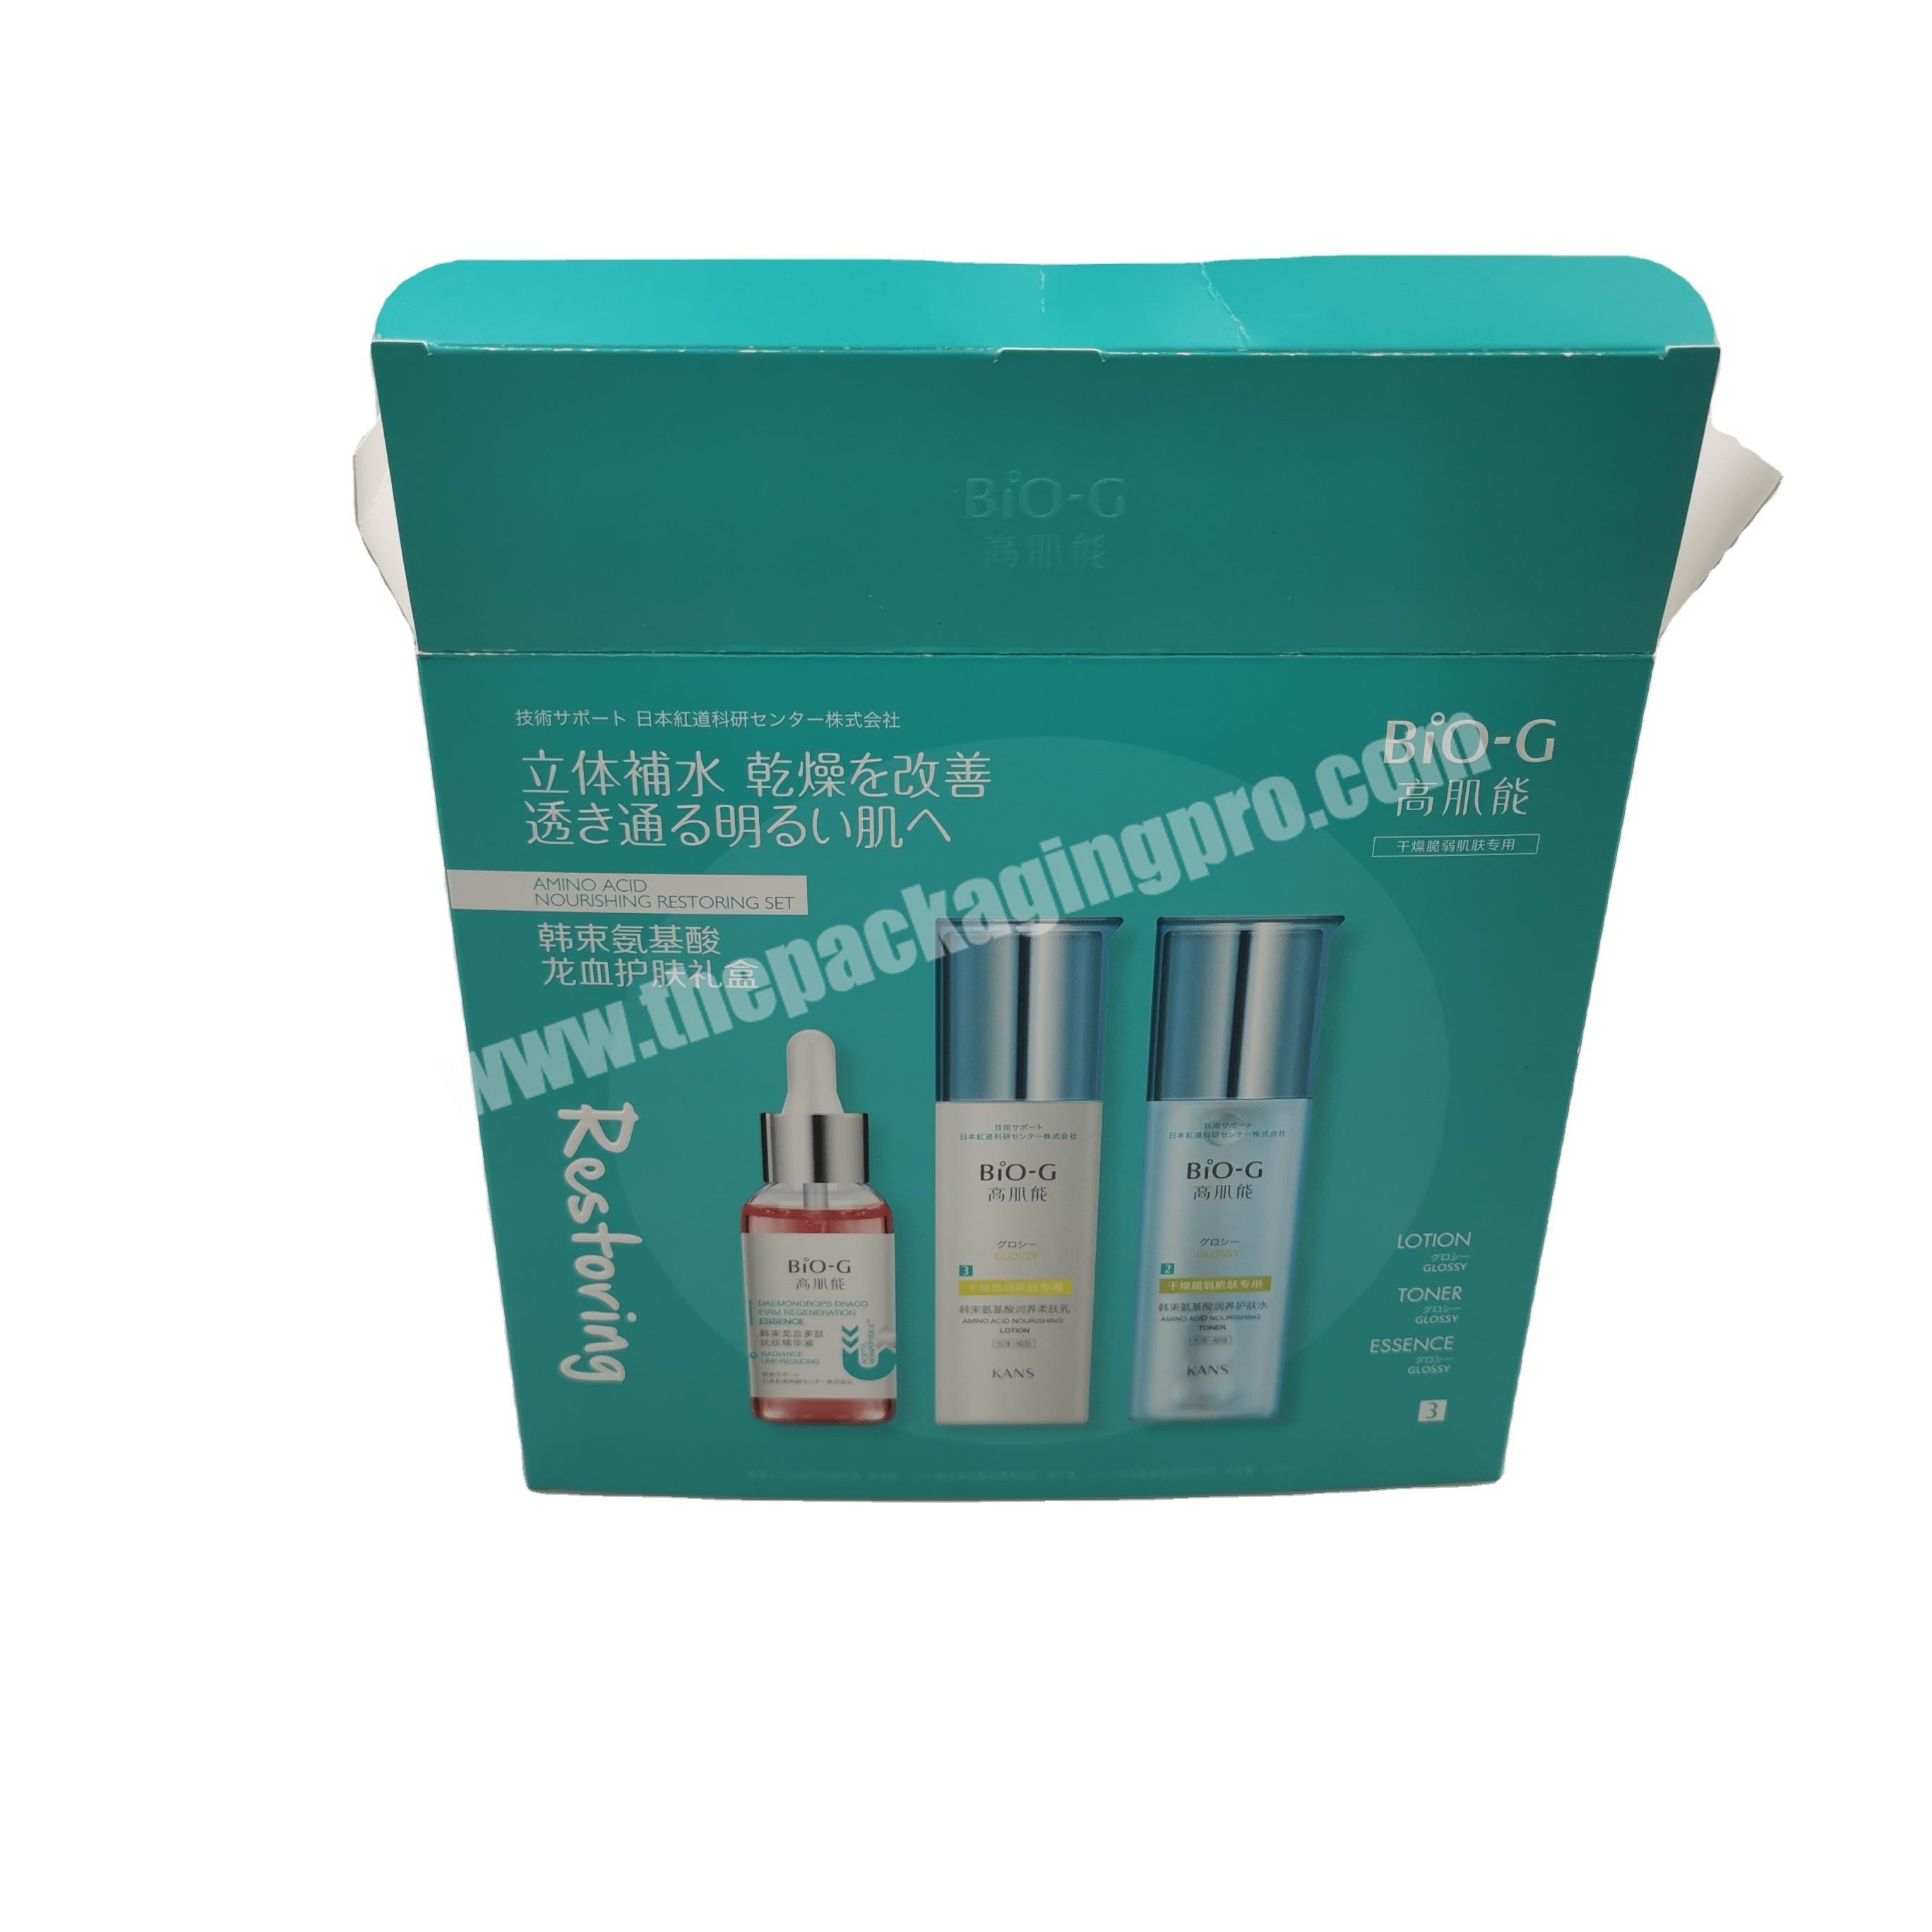 High Quality Cosmetic Packaging Box